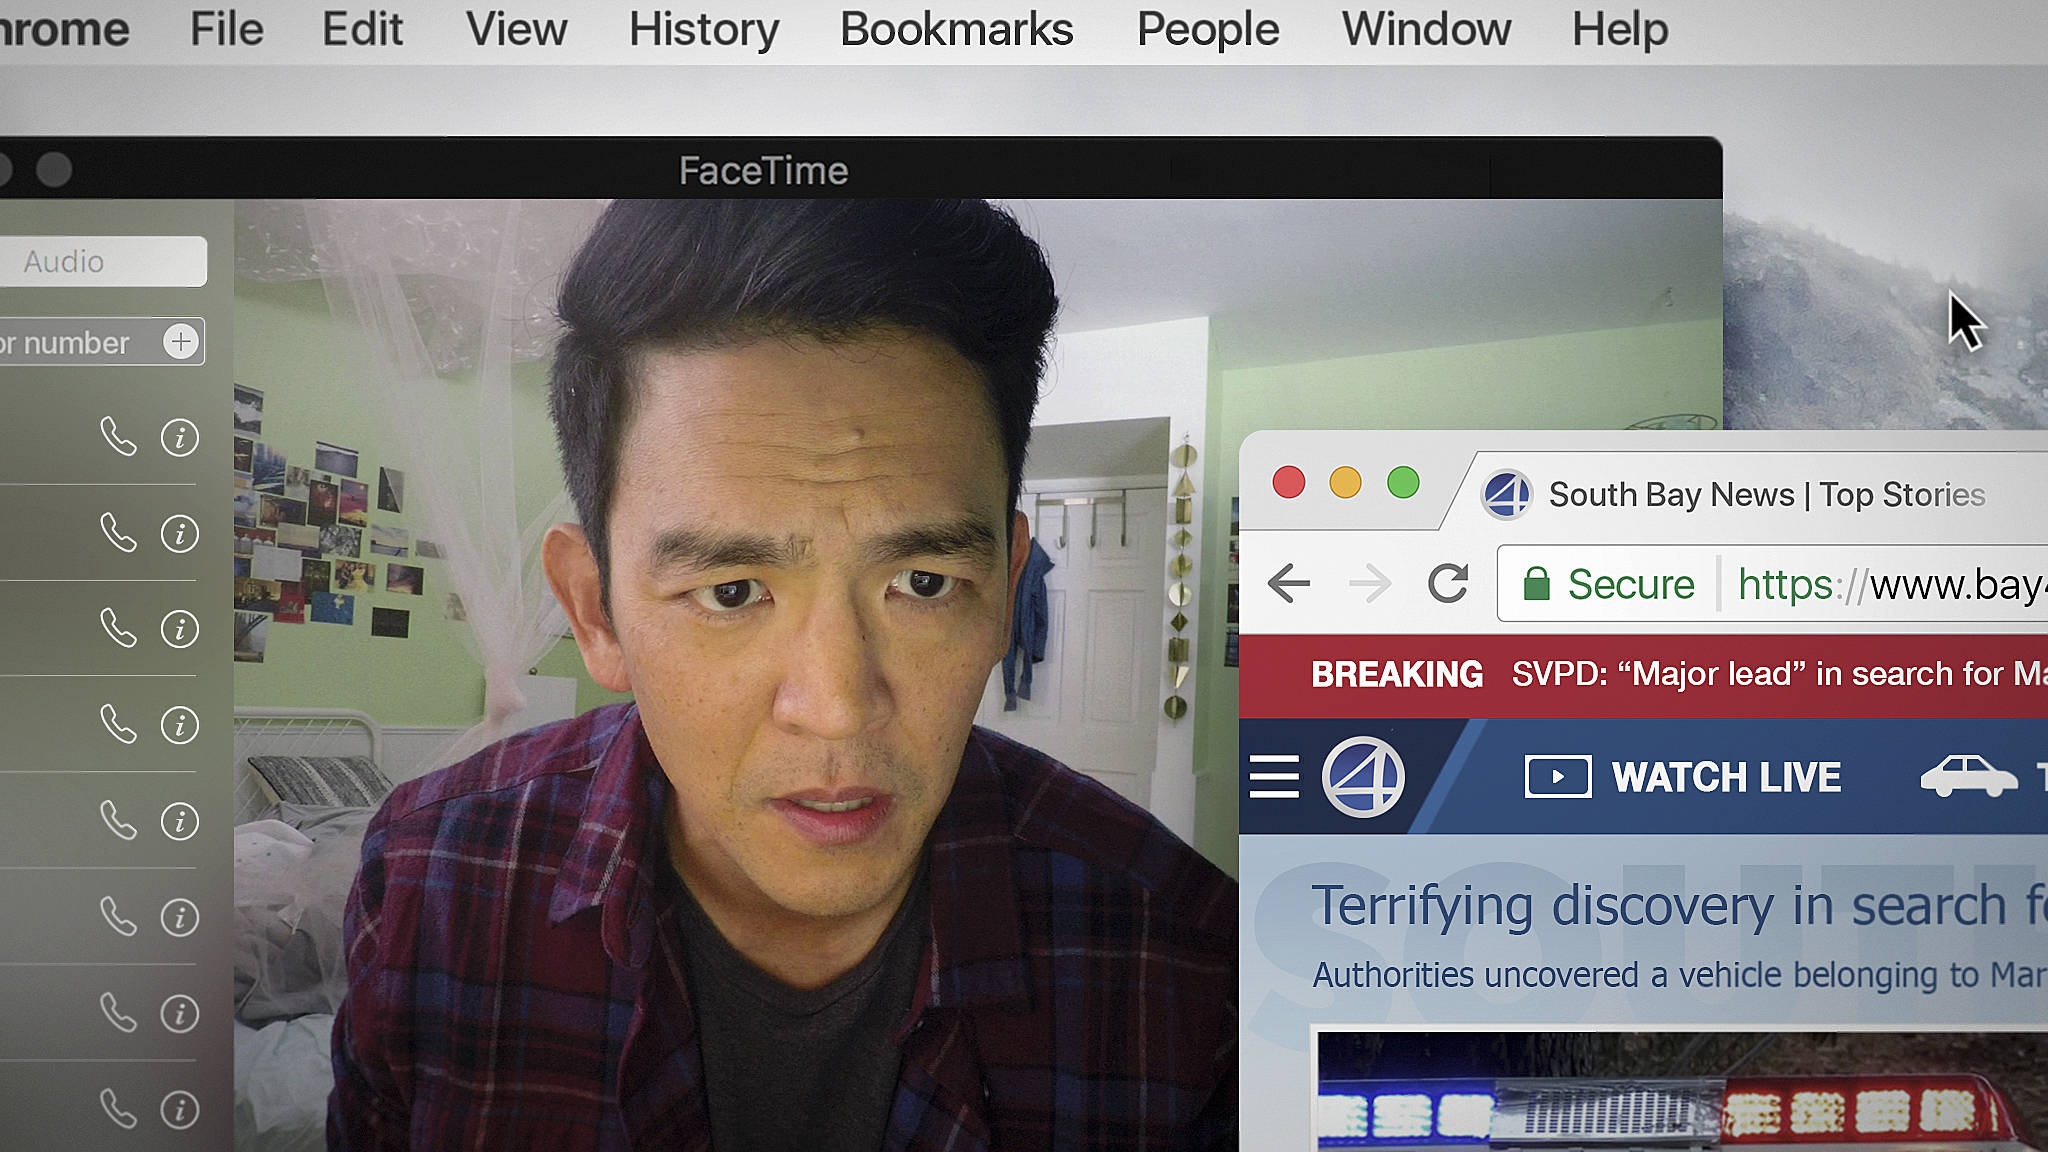 John Cho logs on to find his missing daughter in Searching. Photo by Sebastian Baron